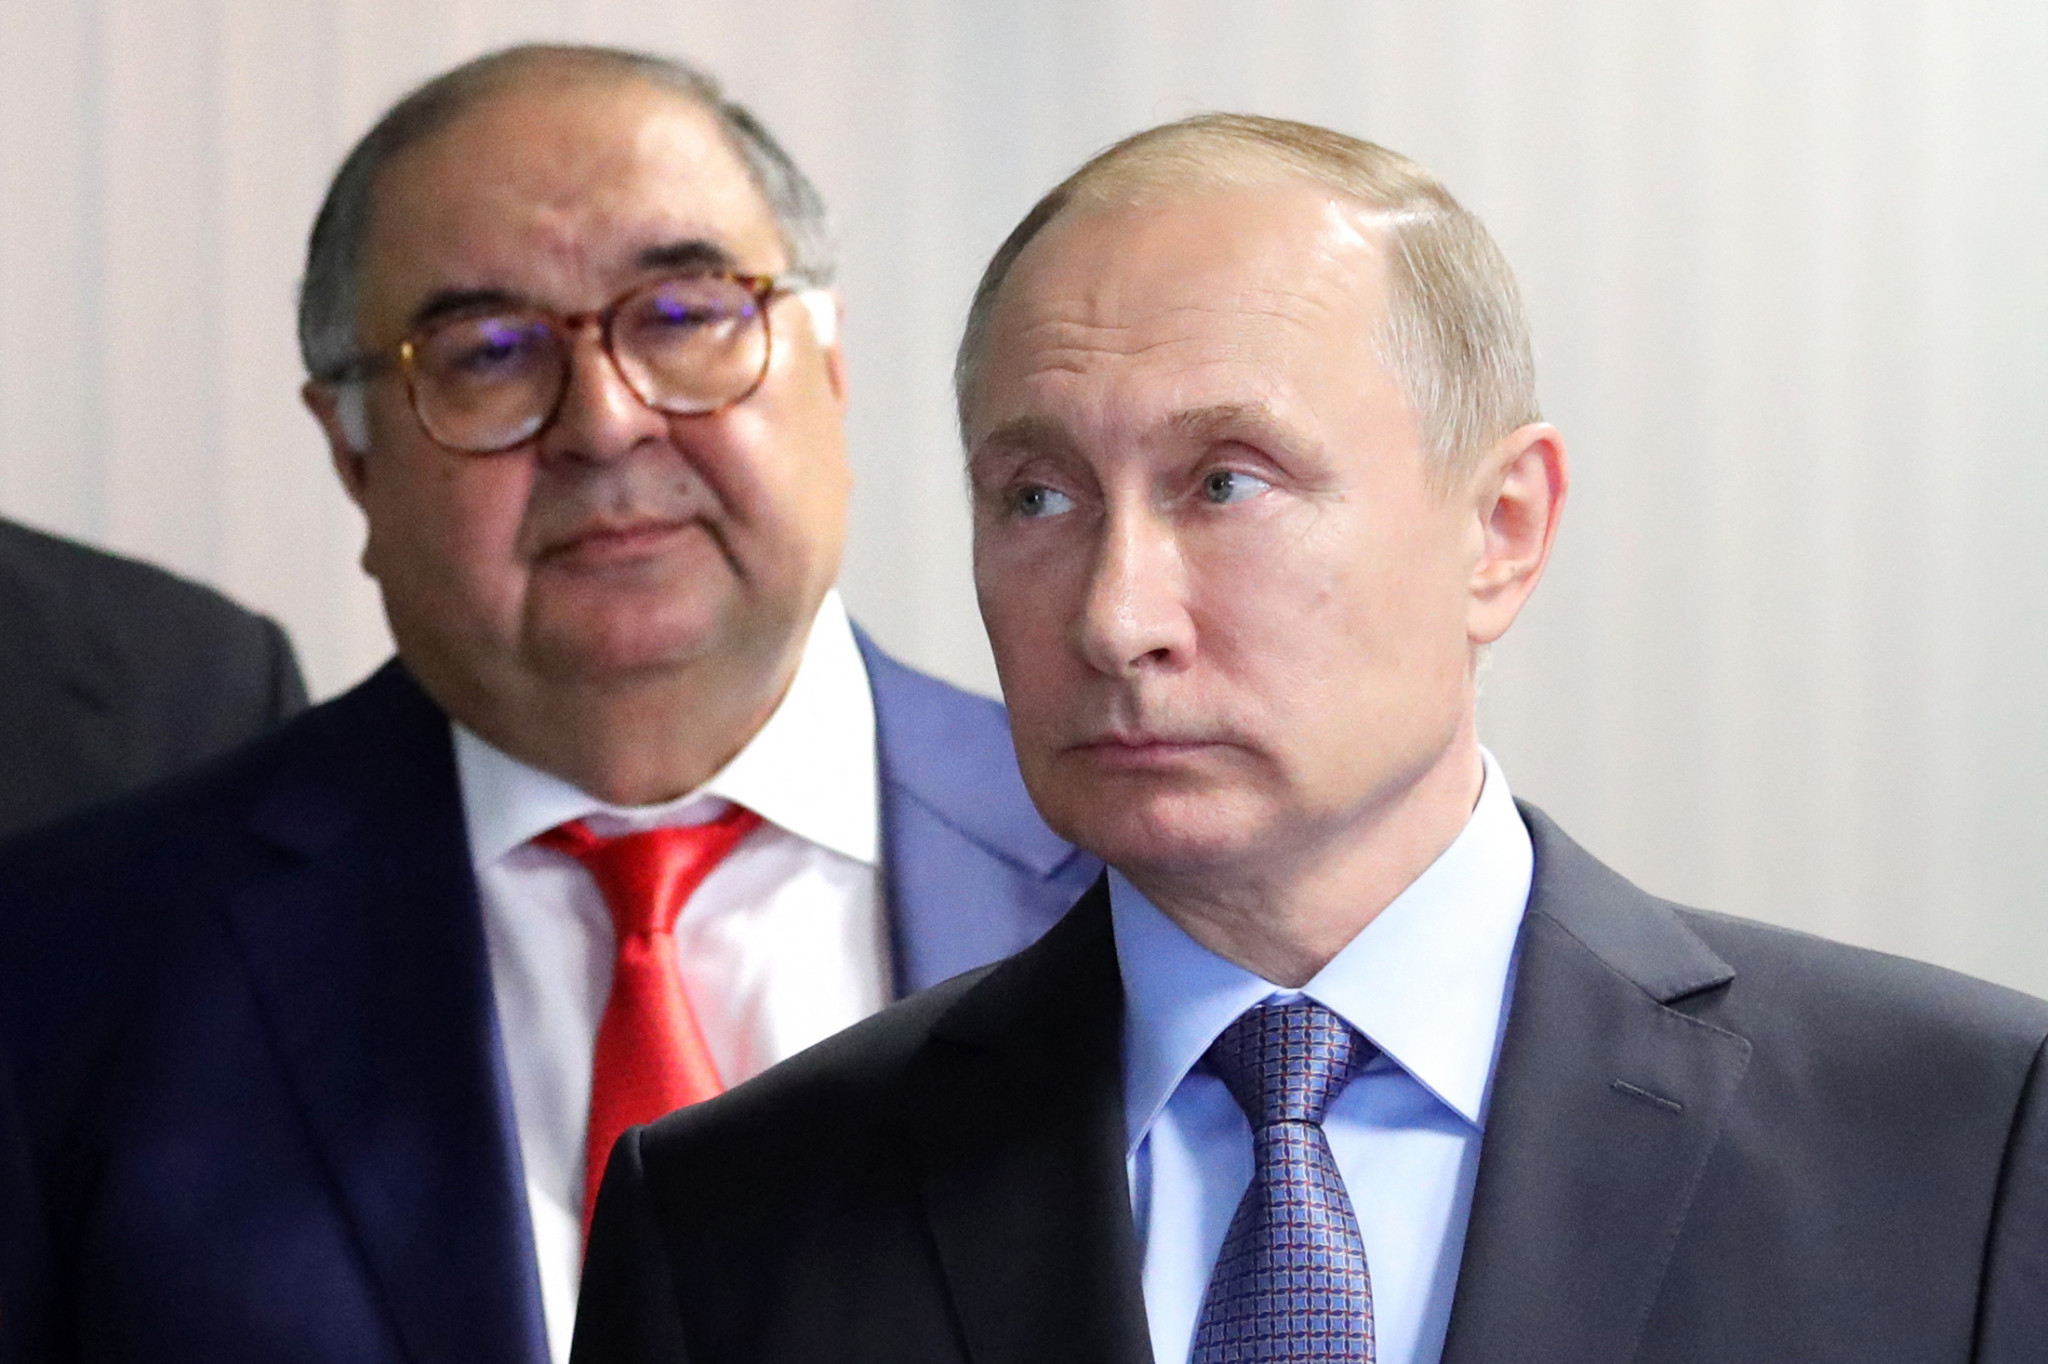 Alisher Usmanov, left, stepped aside as FIE President after being placed on the European Union's sanction list ©Getty Images